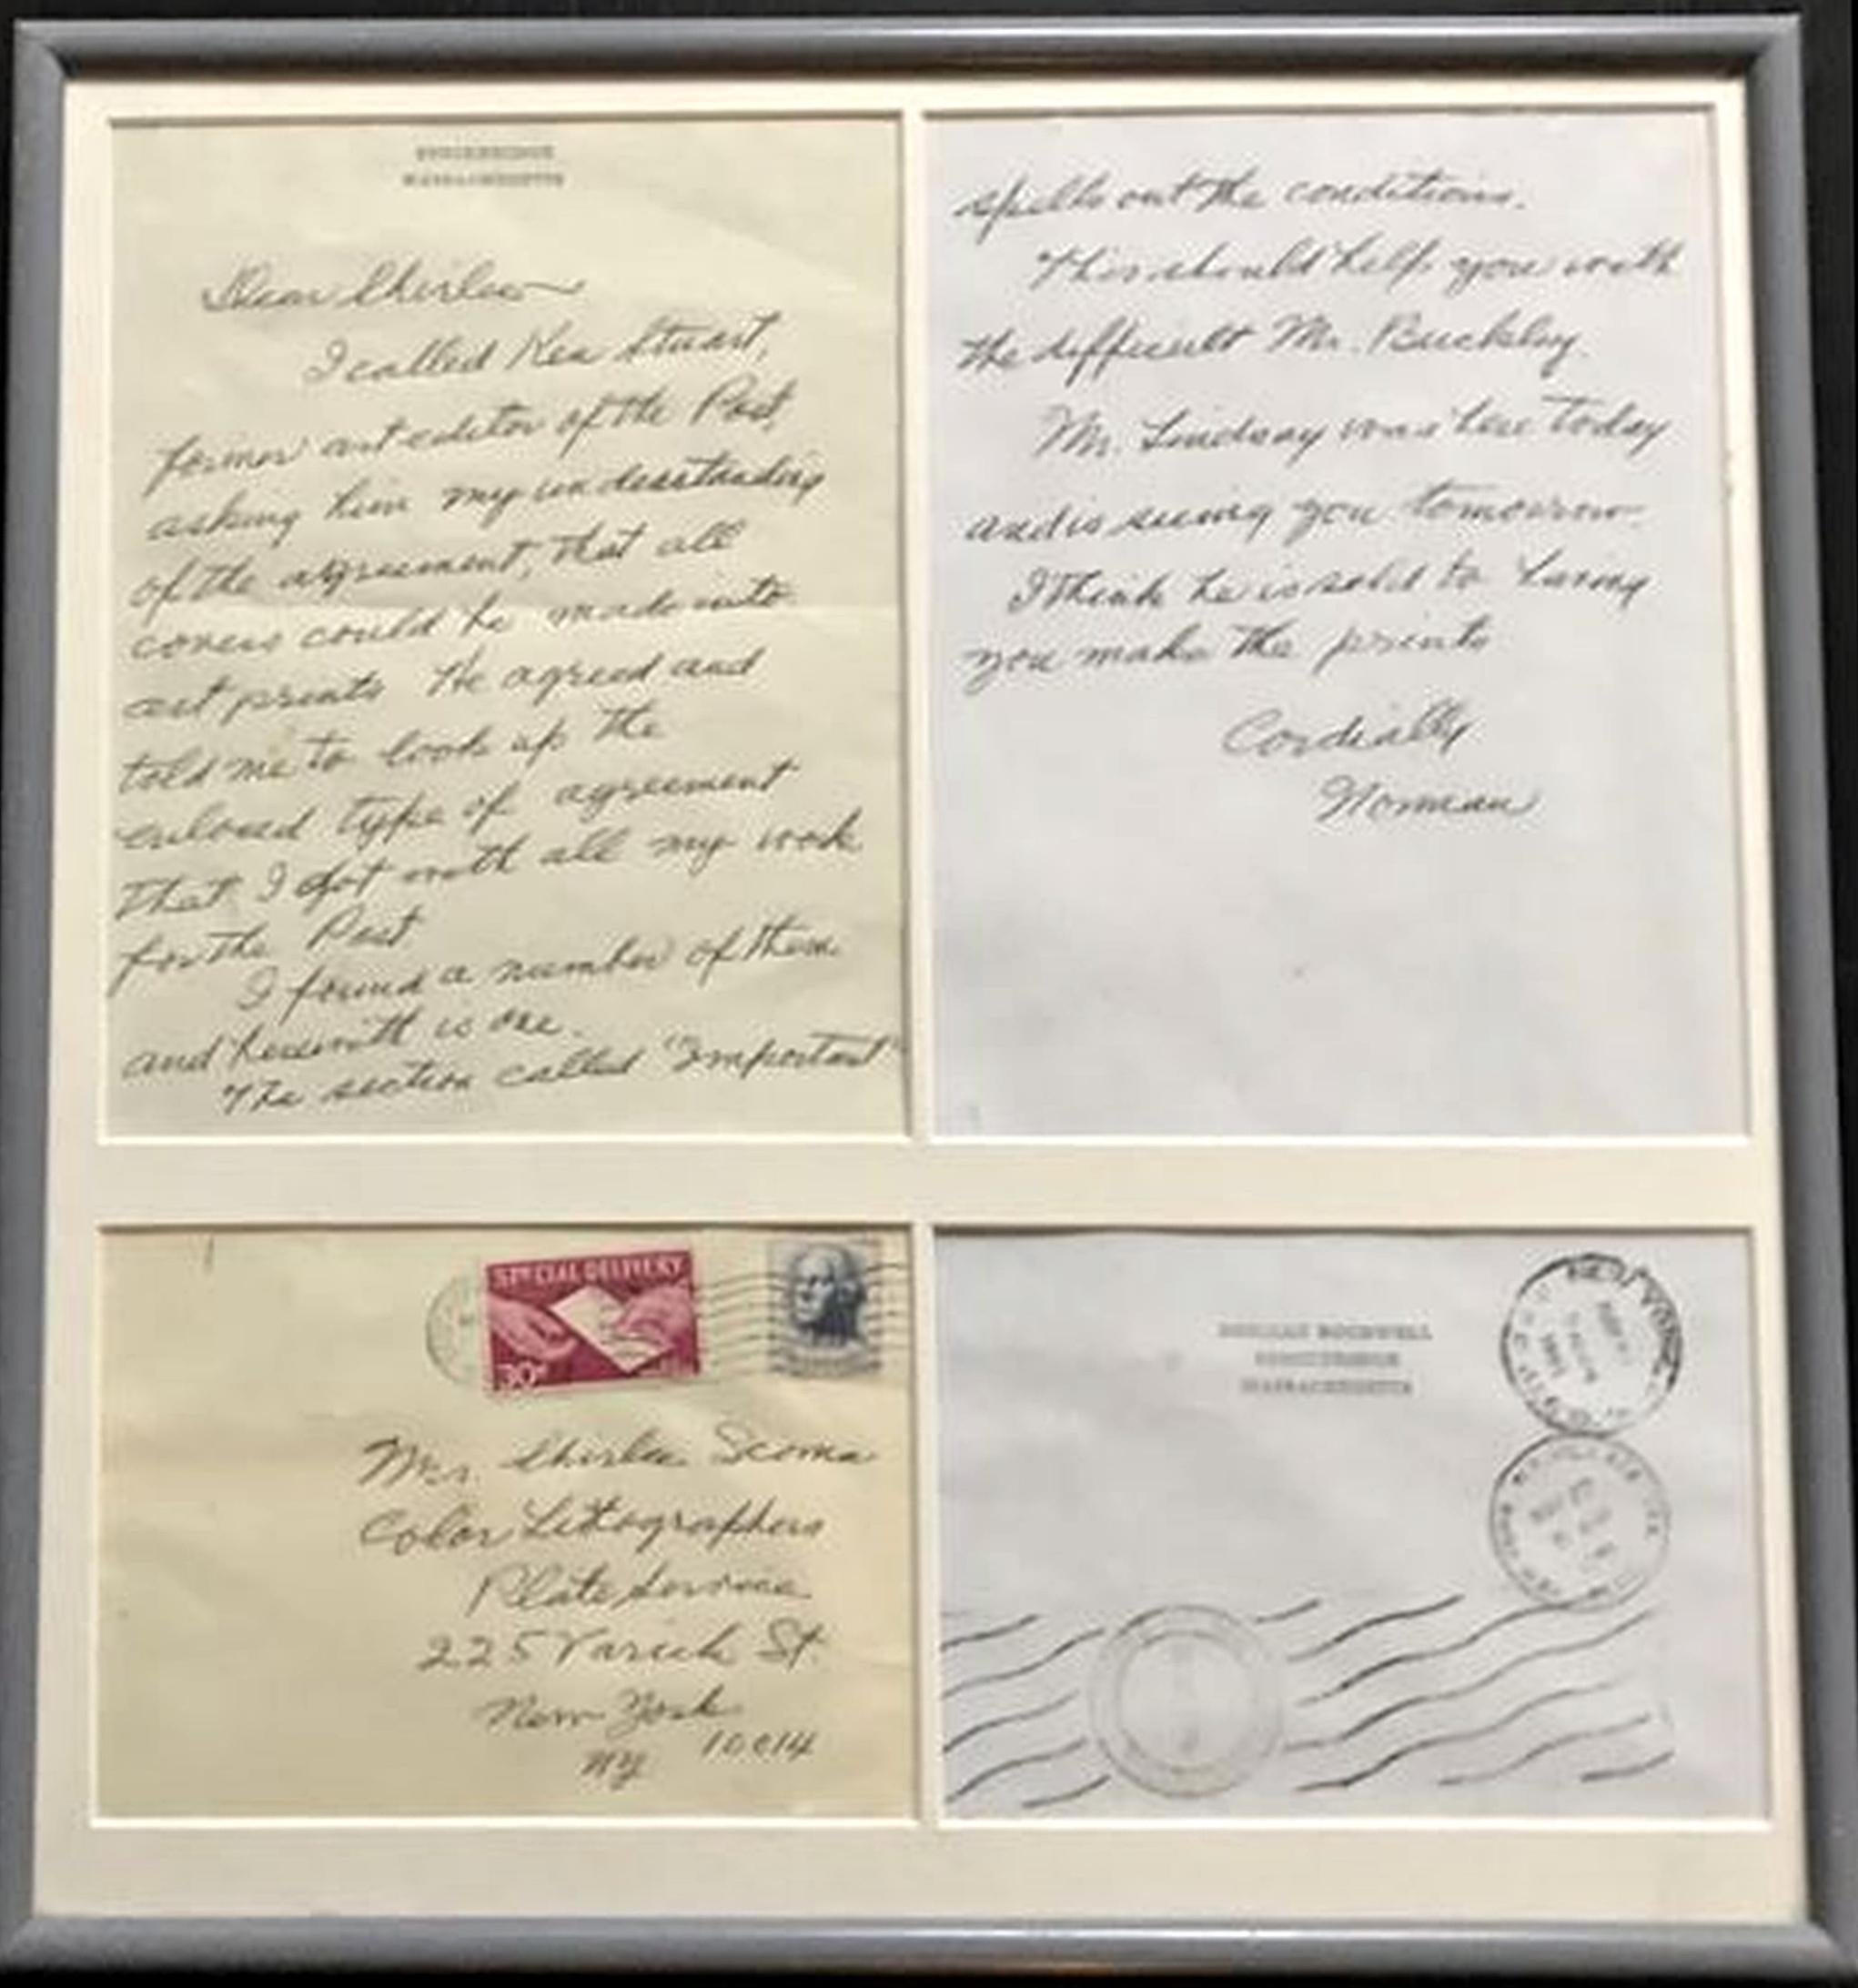 "This should help you with the difficult Mr. Buckley" handwritten, signed letter - Art by Norman Rockwell